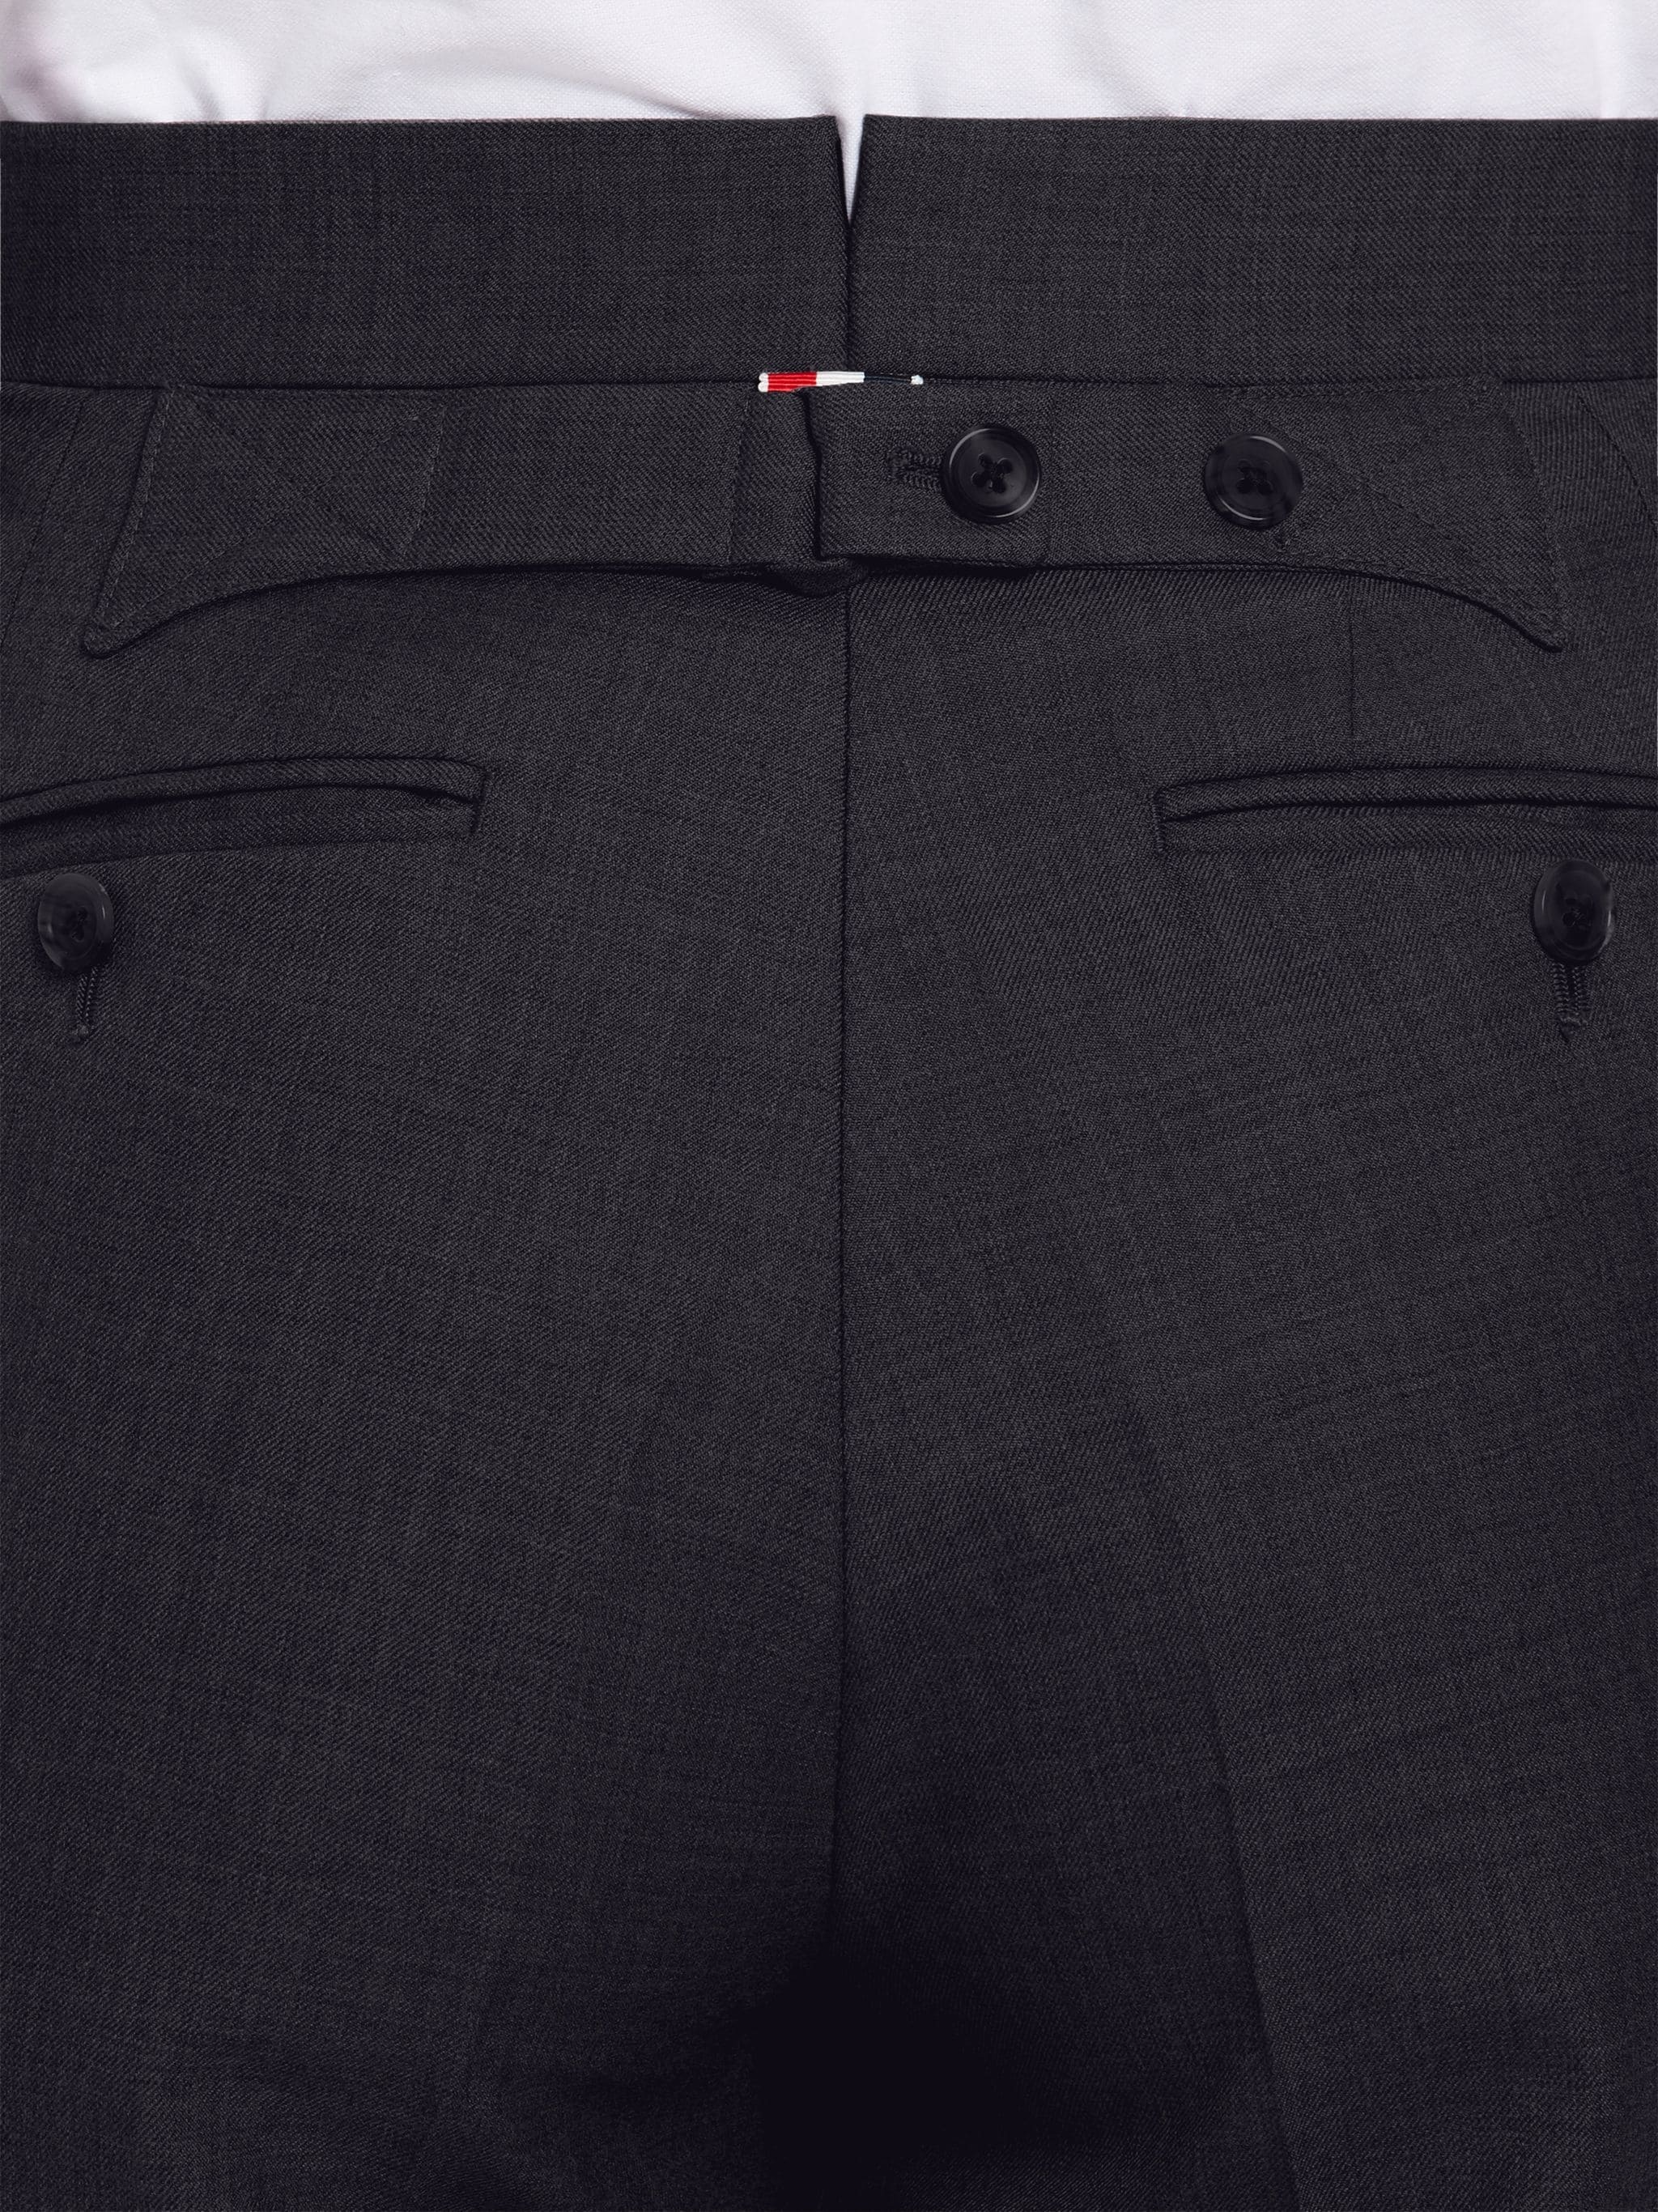 Charcoal Super 120's Wool Twill Classic Suit - 5